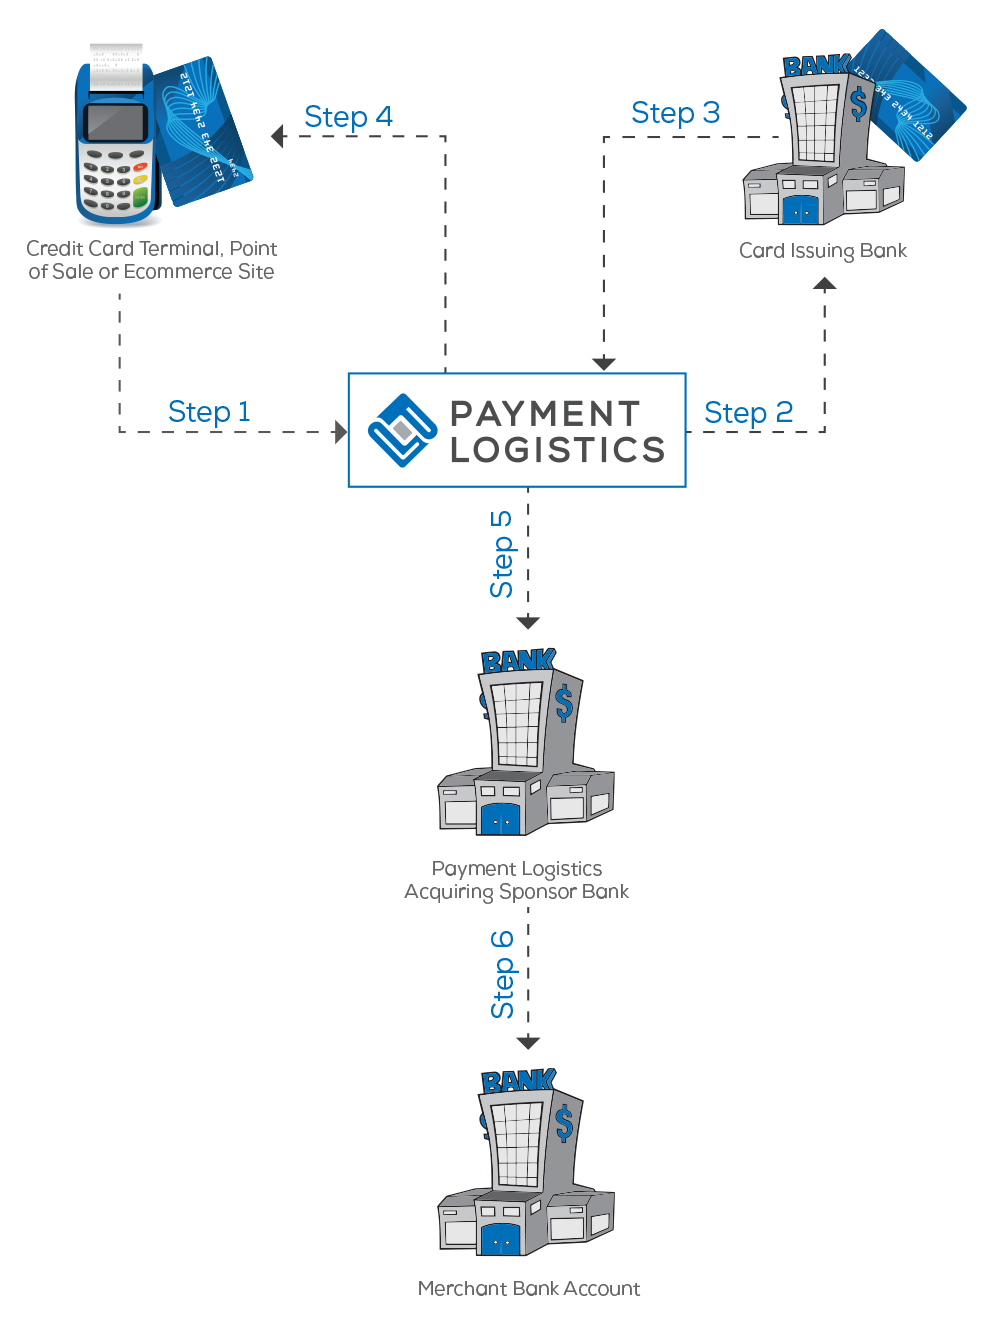 how credit card processing works